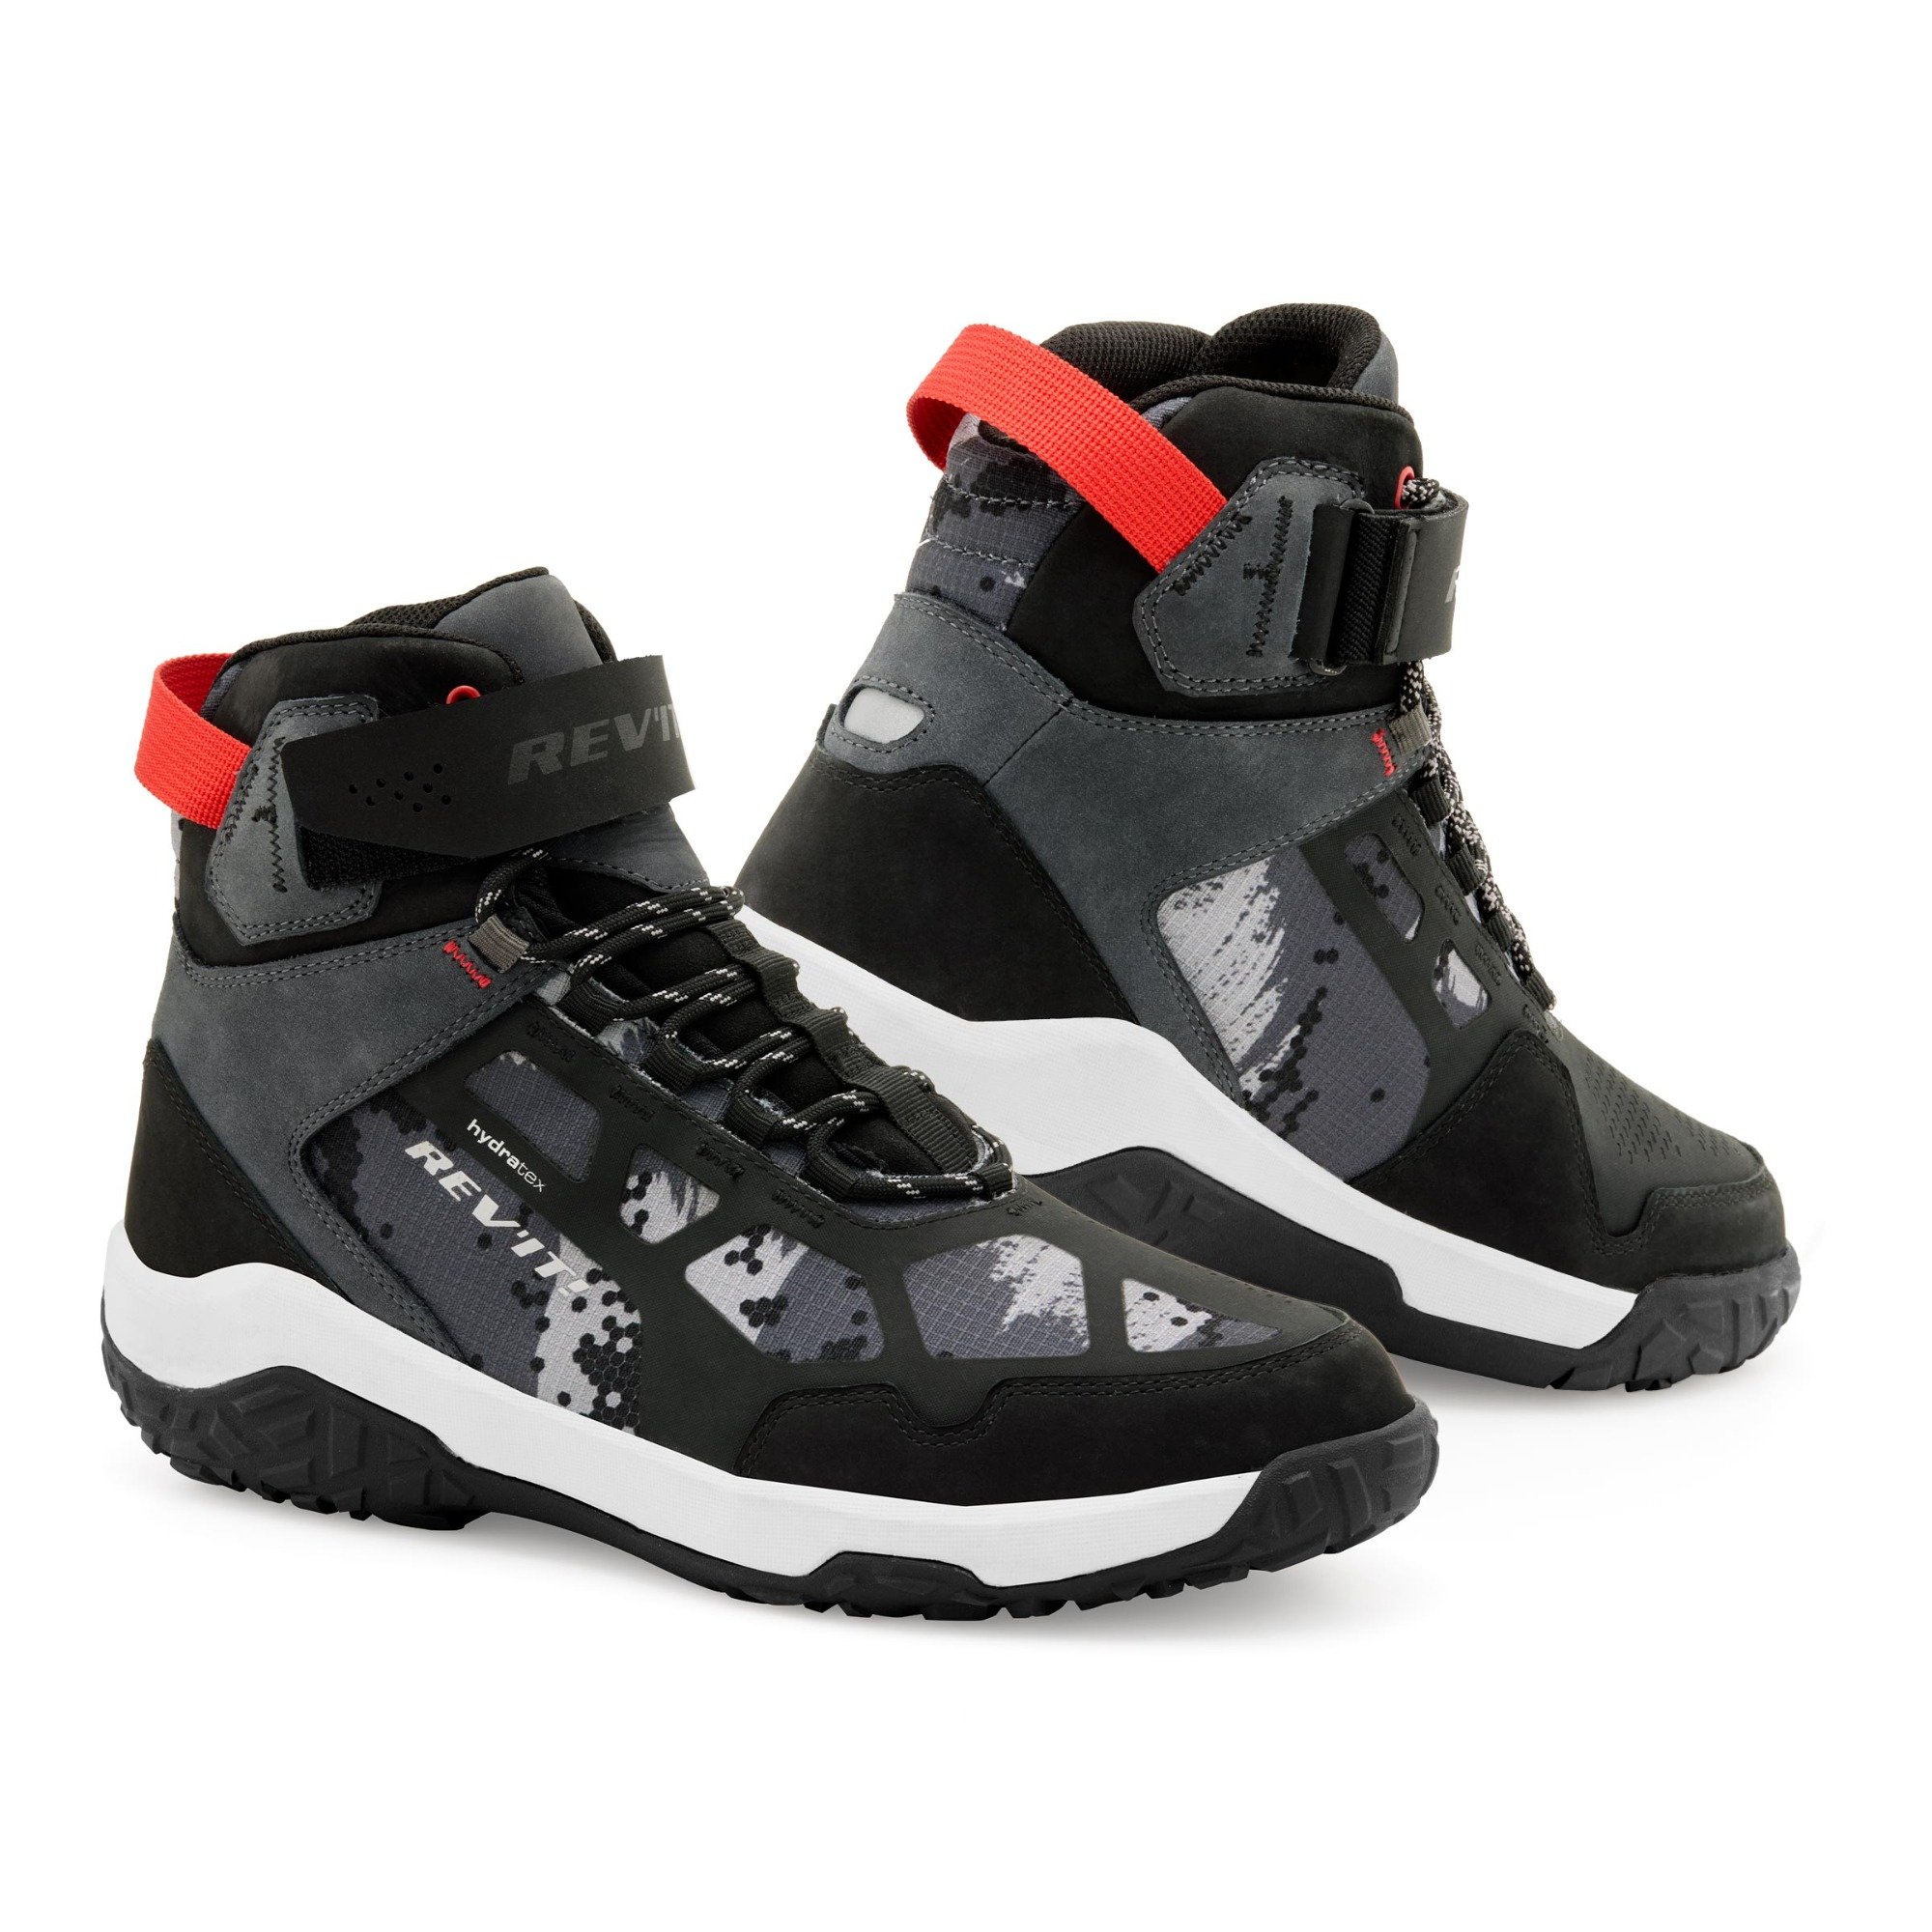 Image of REV'IT! Shoes Descent H2O Black Red Size 40 ID 8700001328425